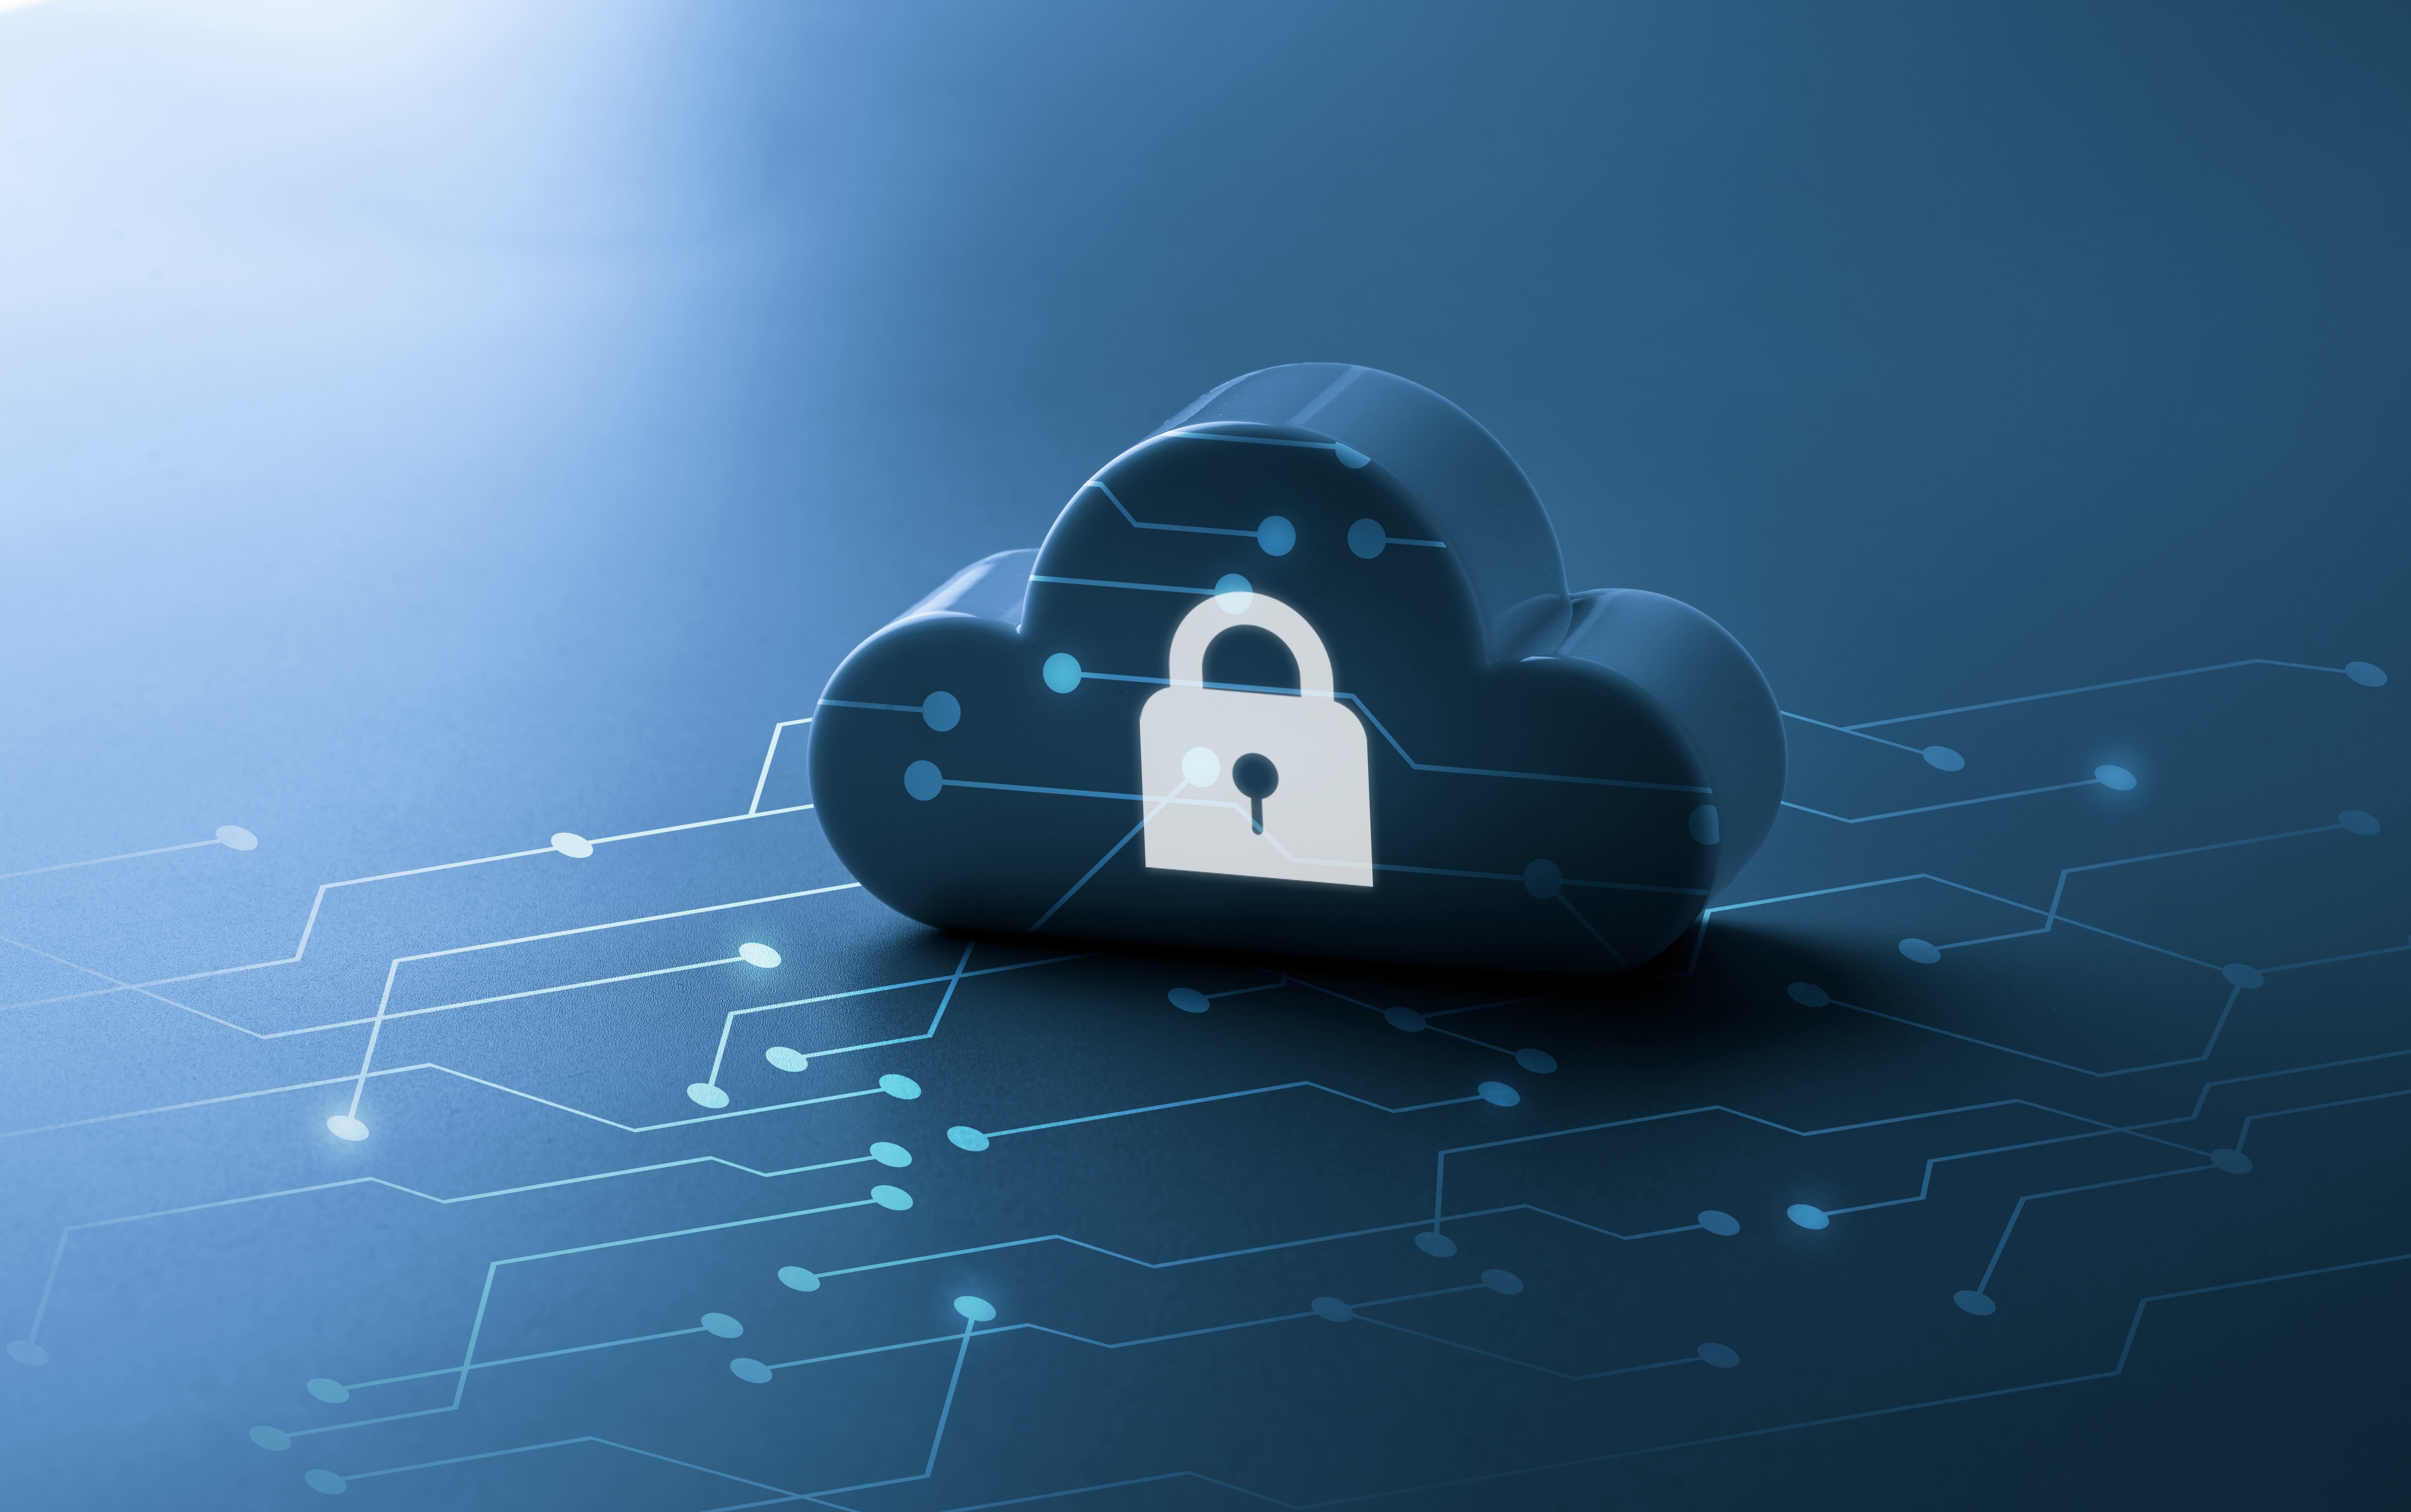 Improving Your Cloud Security Using JIT Access for Sensitive SaaS Applications